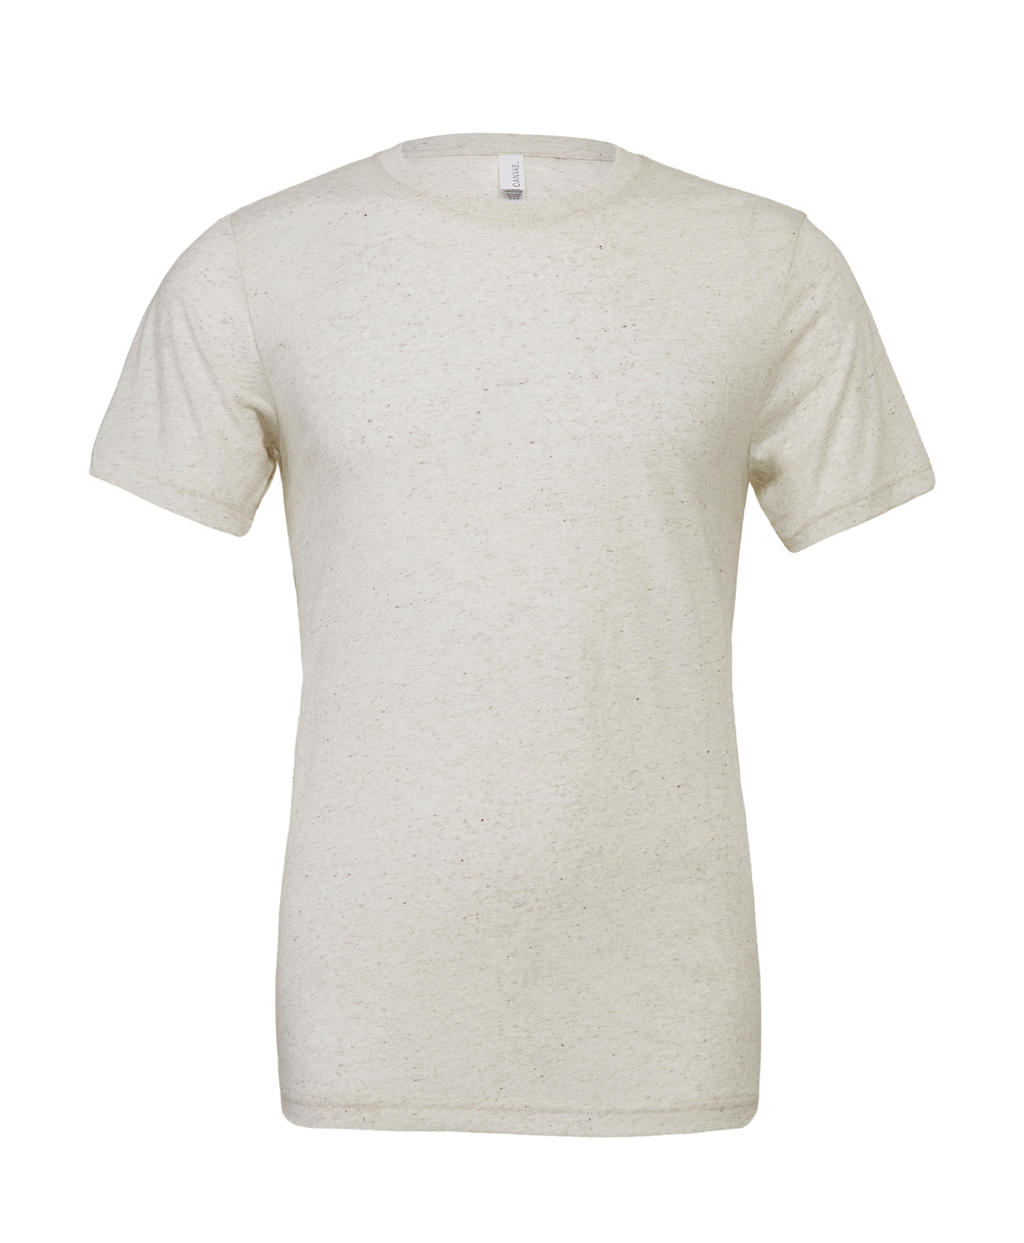  Unisex Triblend Short Sleeve Tee in Farbe White Fleck Triblend